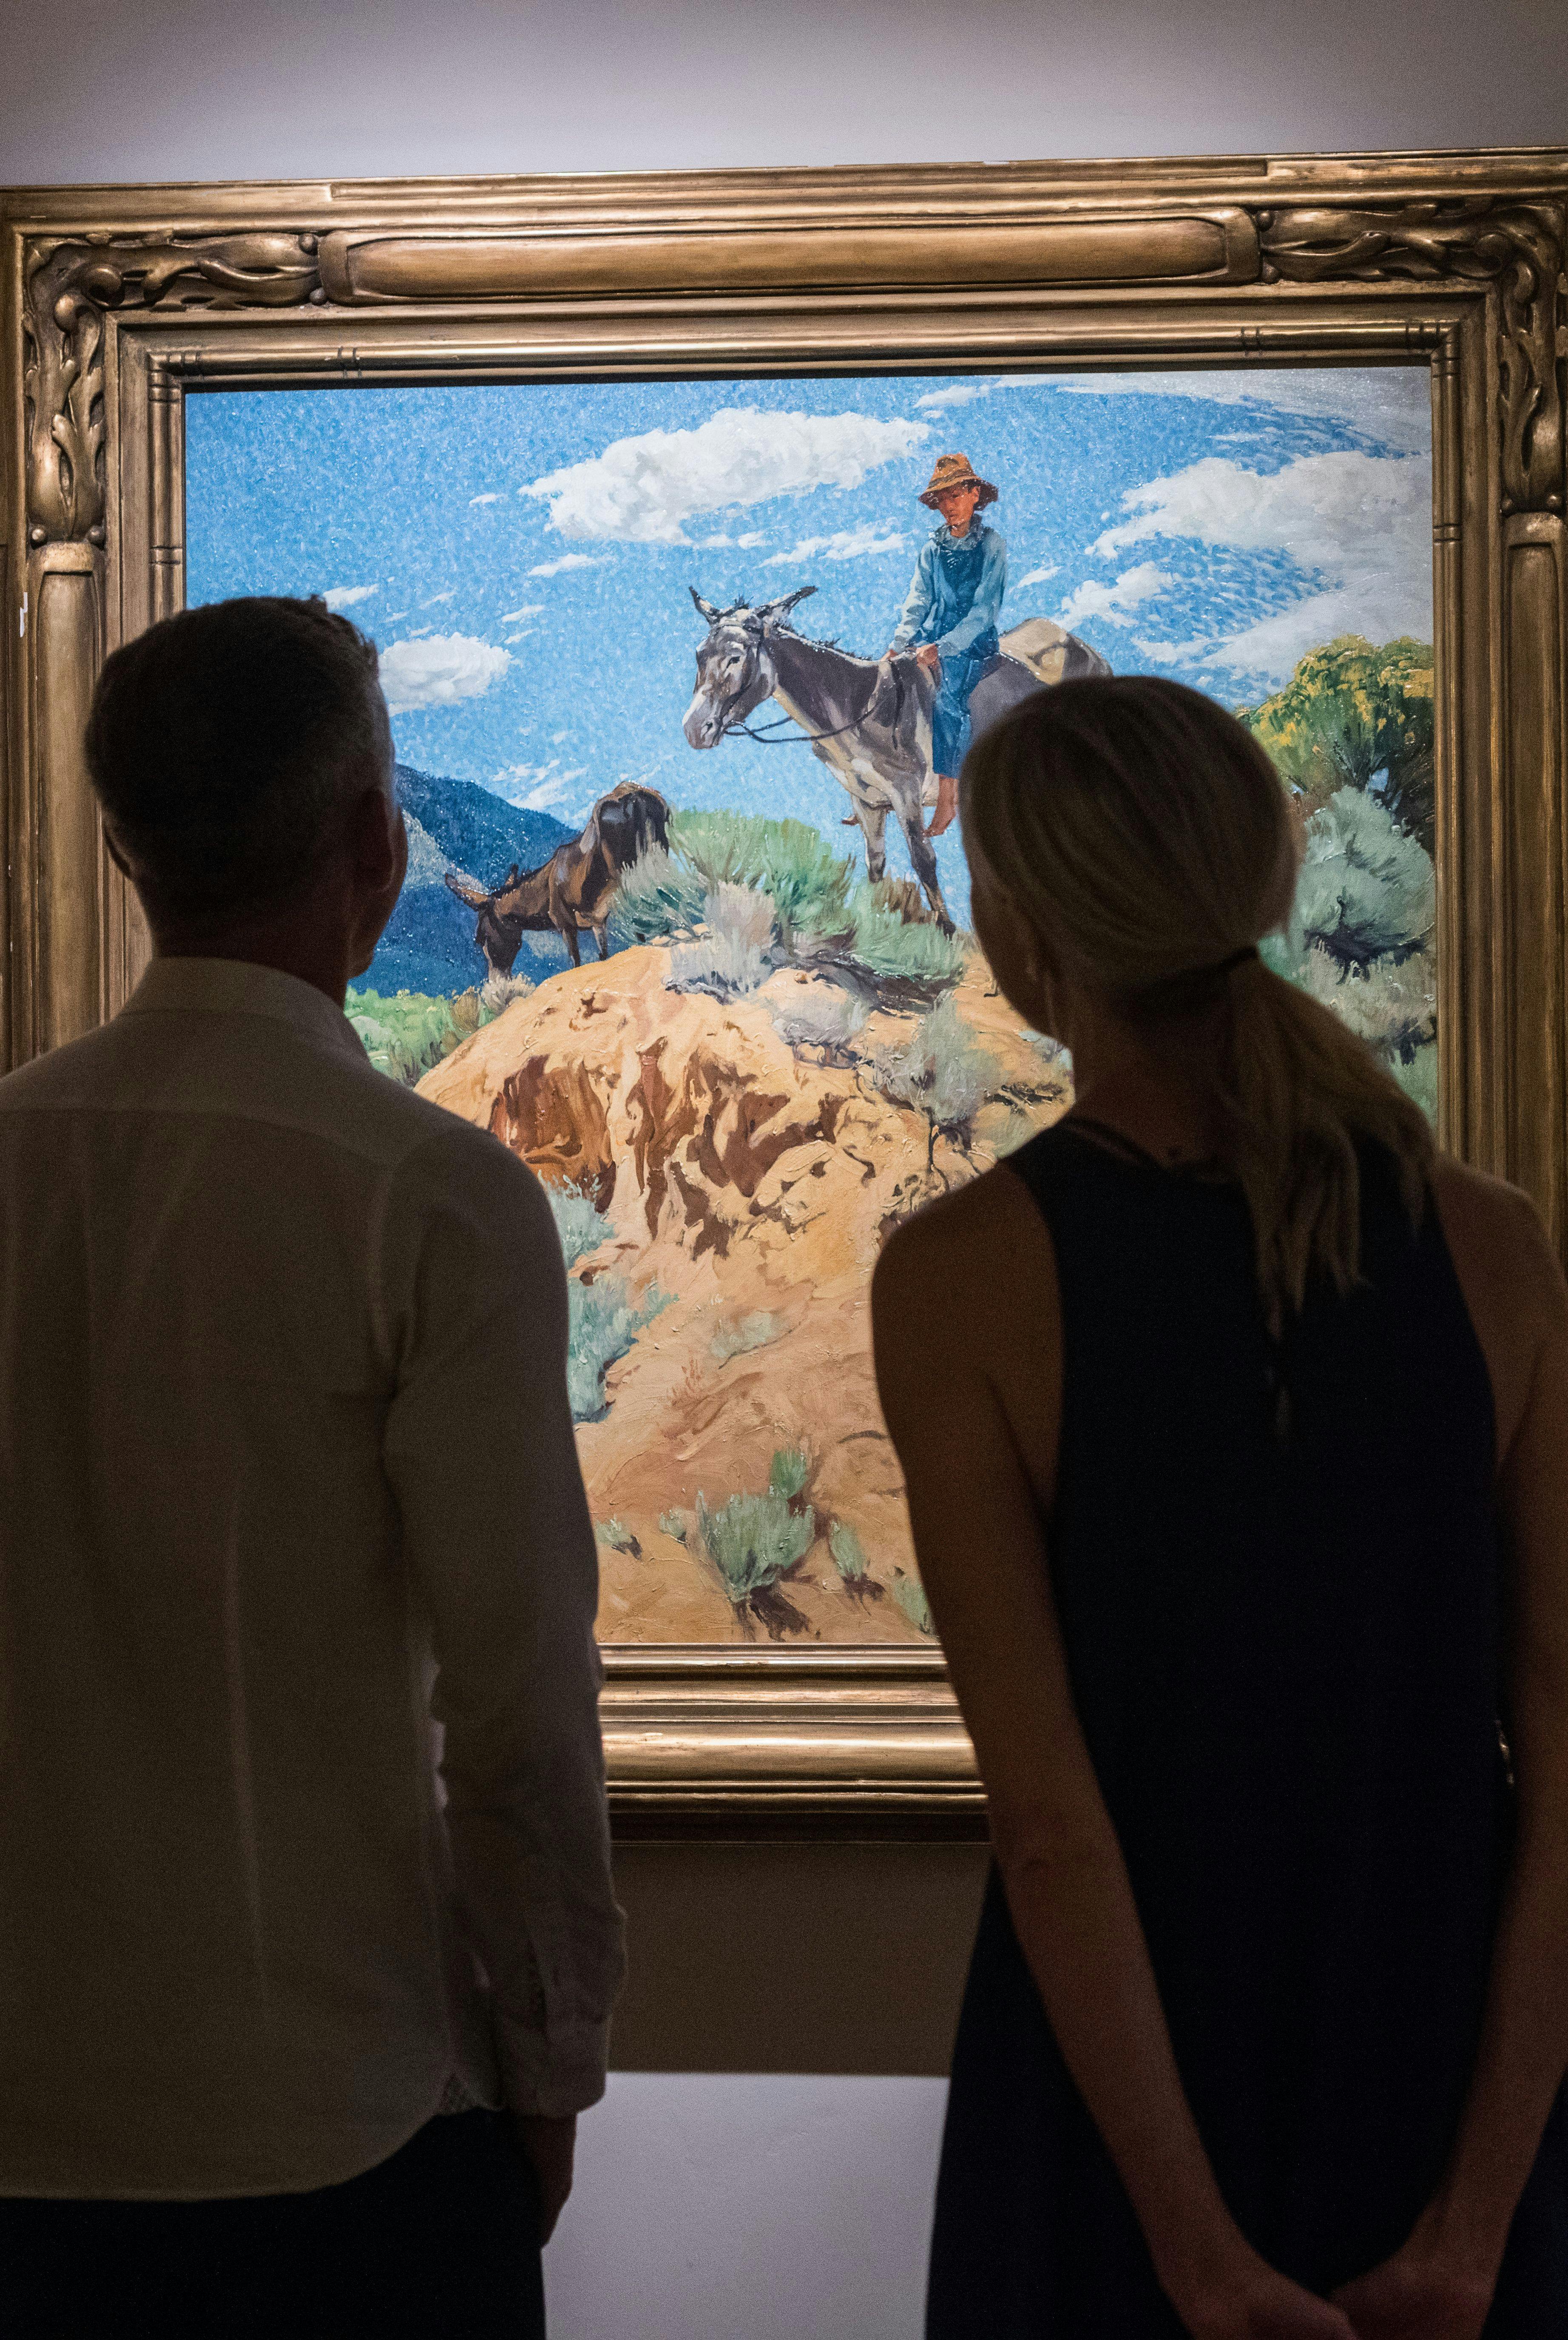 Two guests at The Blake closely observe a painting by a famous Taos artist